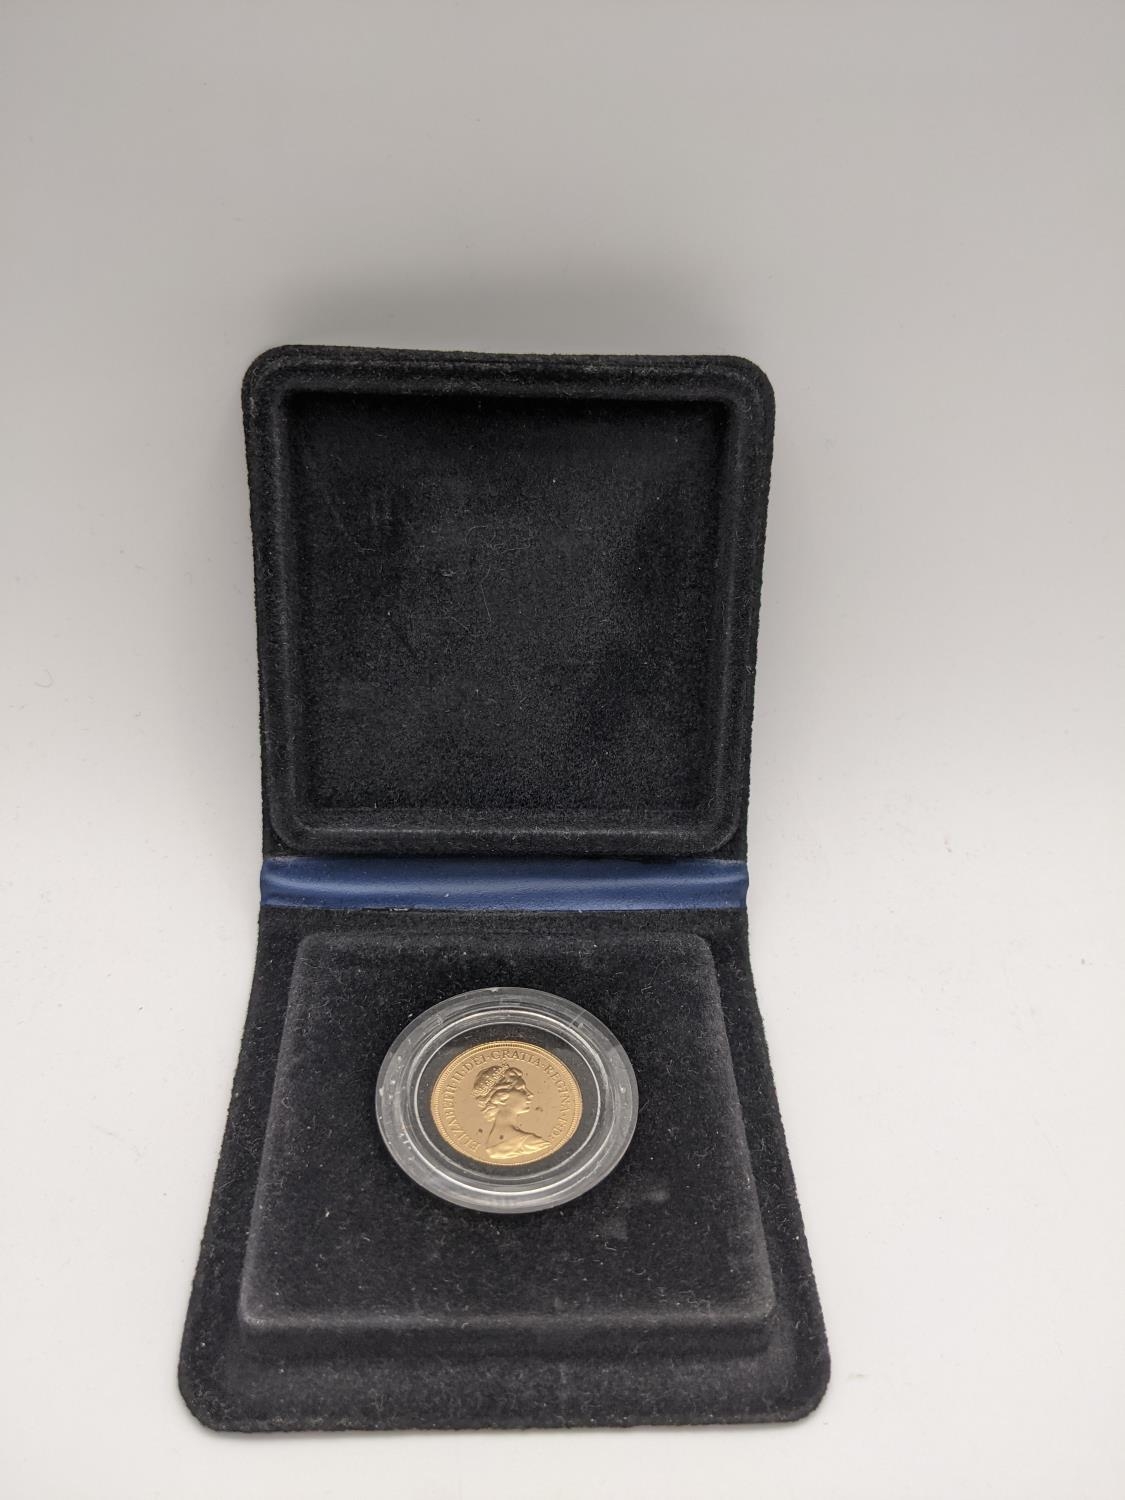 United Kingdom - Elizabeth II Proof Sovereign dated 1979, with box Location: